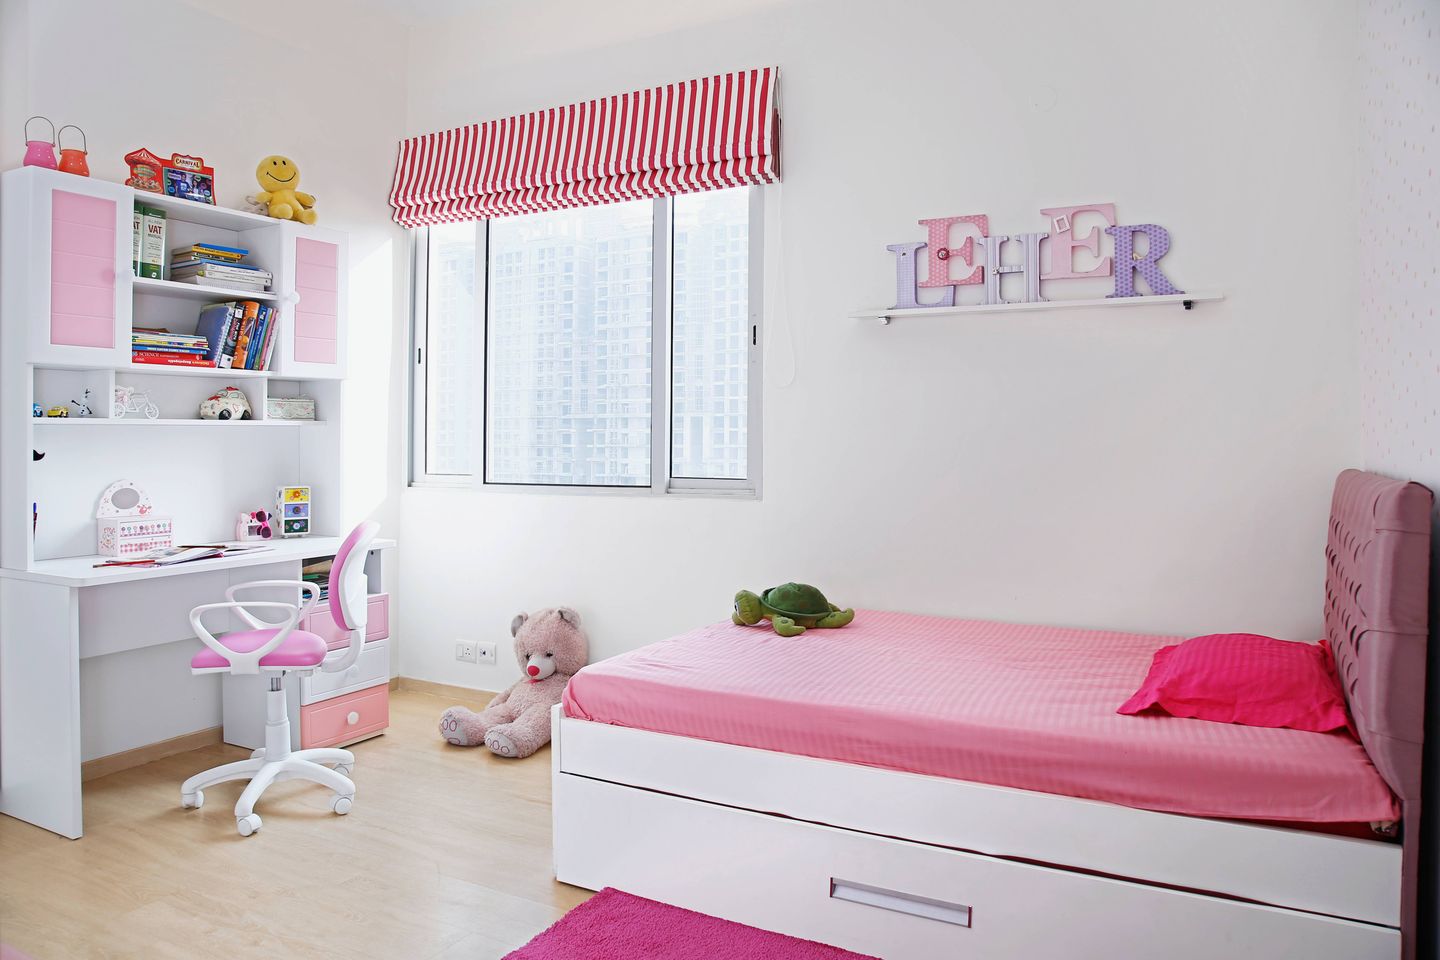 Modern Kids Room Design With A single Bed With Built-In Storage